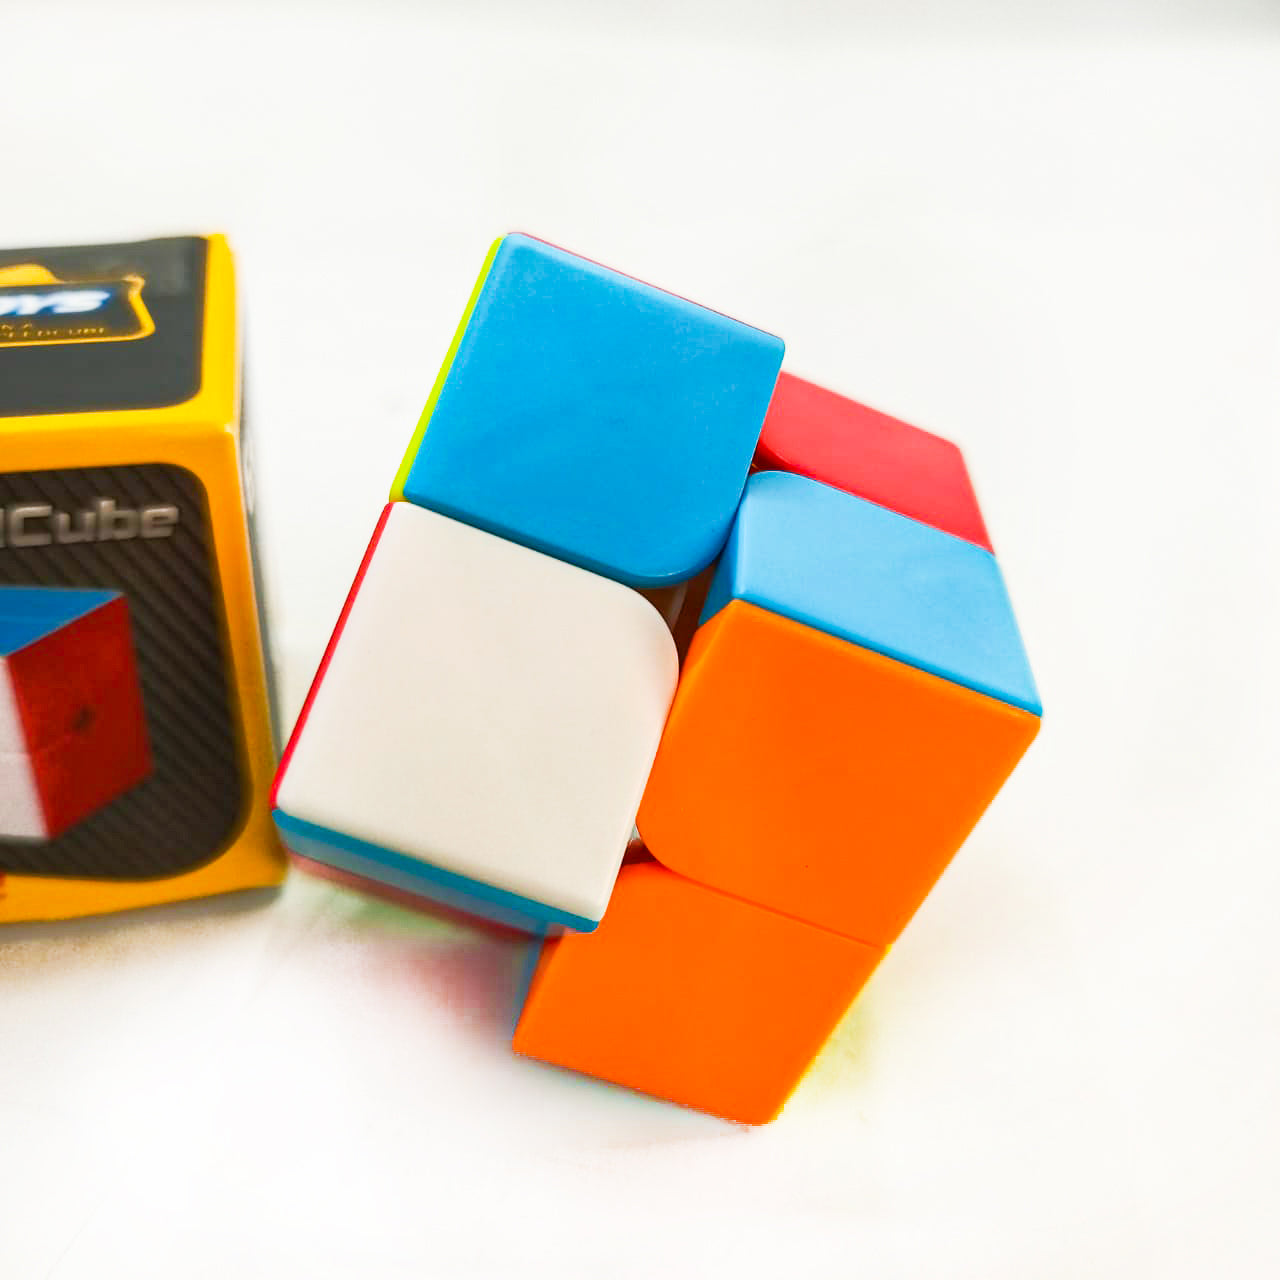 Mind Brain Magic Cube Problem Solving Game for Kids and Adults